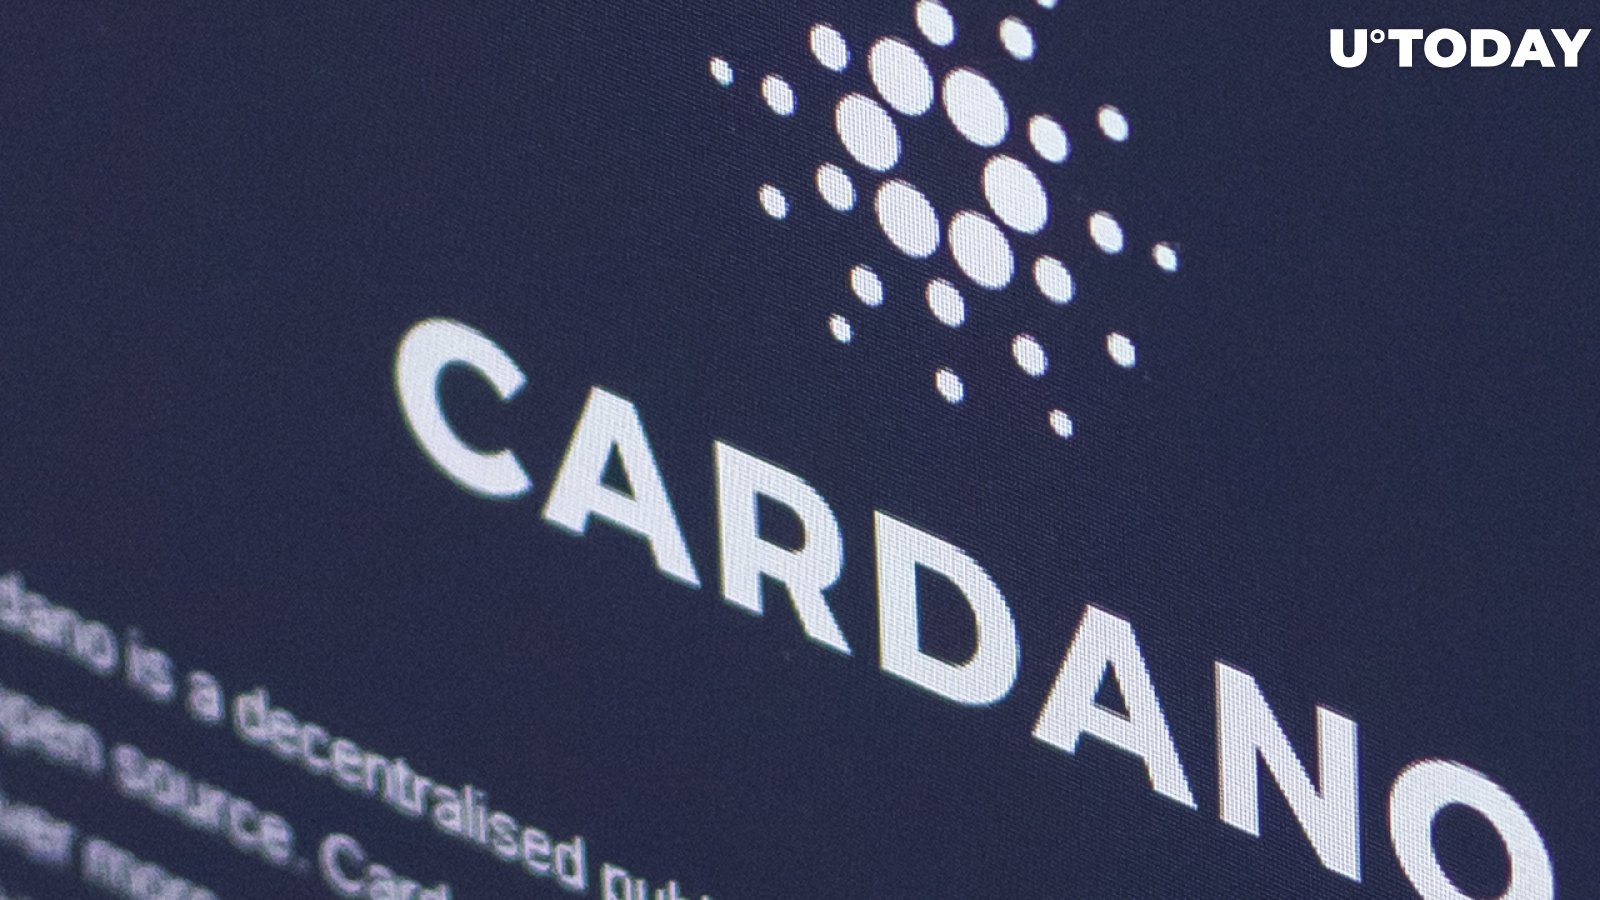 Cardano Attracts More Institutional Investors as On-Chain Transaction Volumes Increase 50 Times